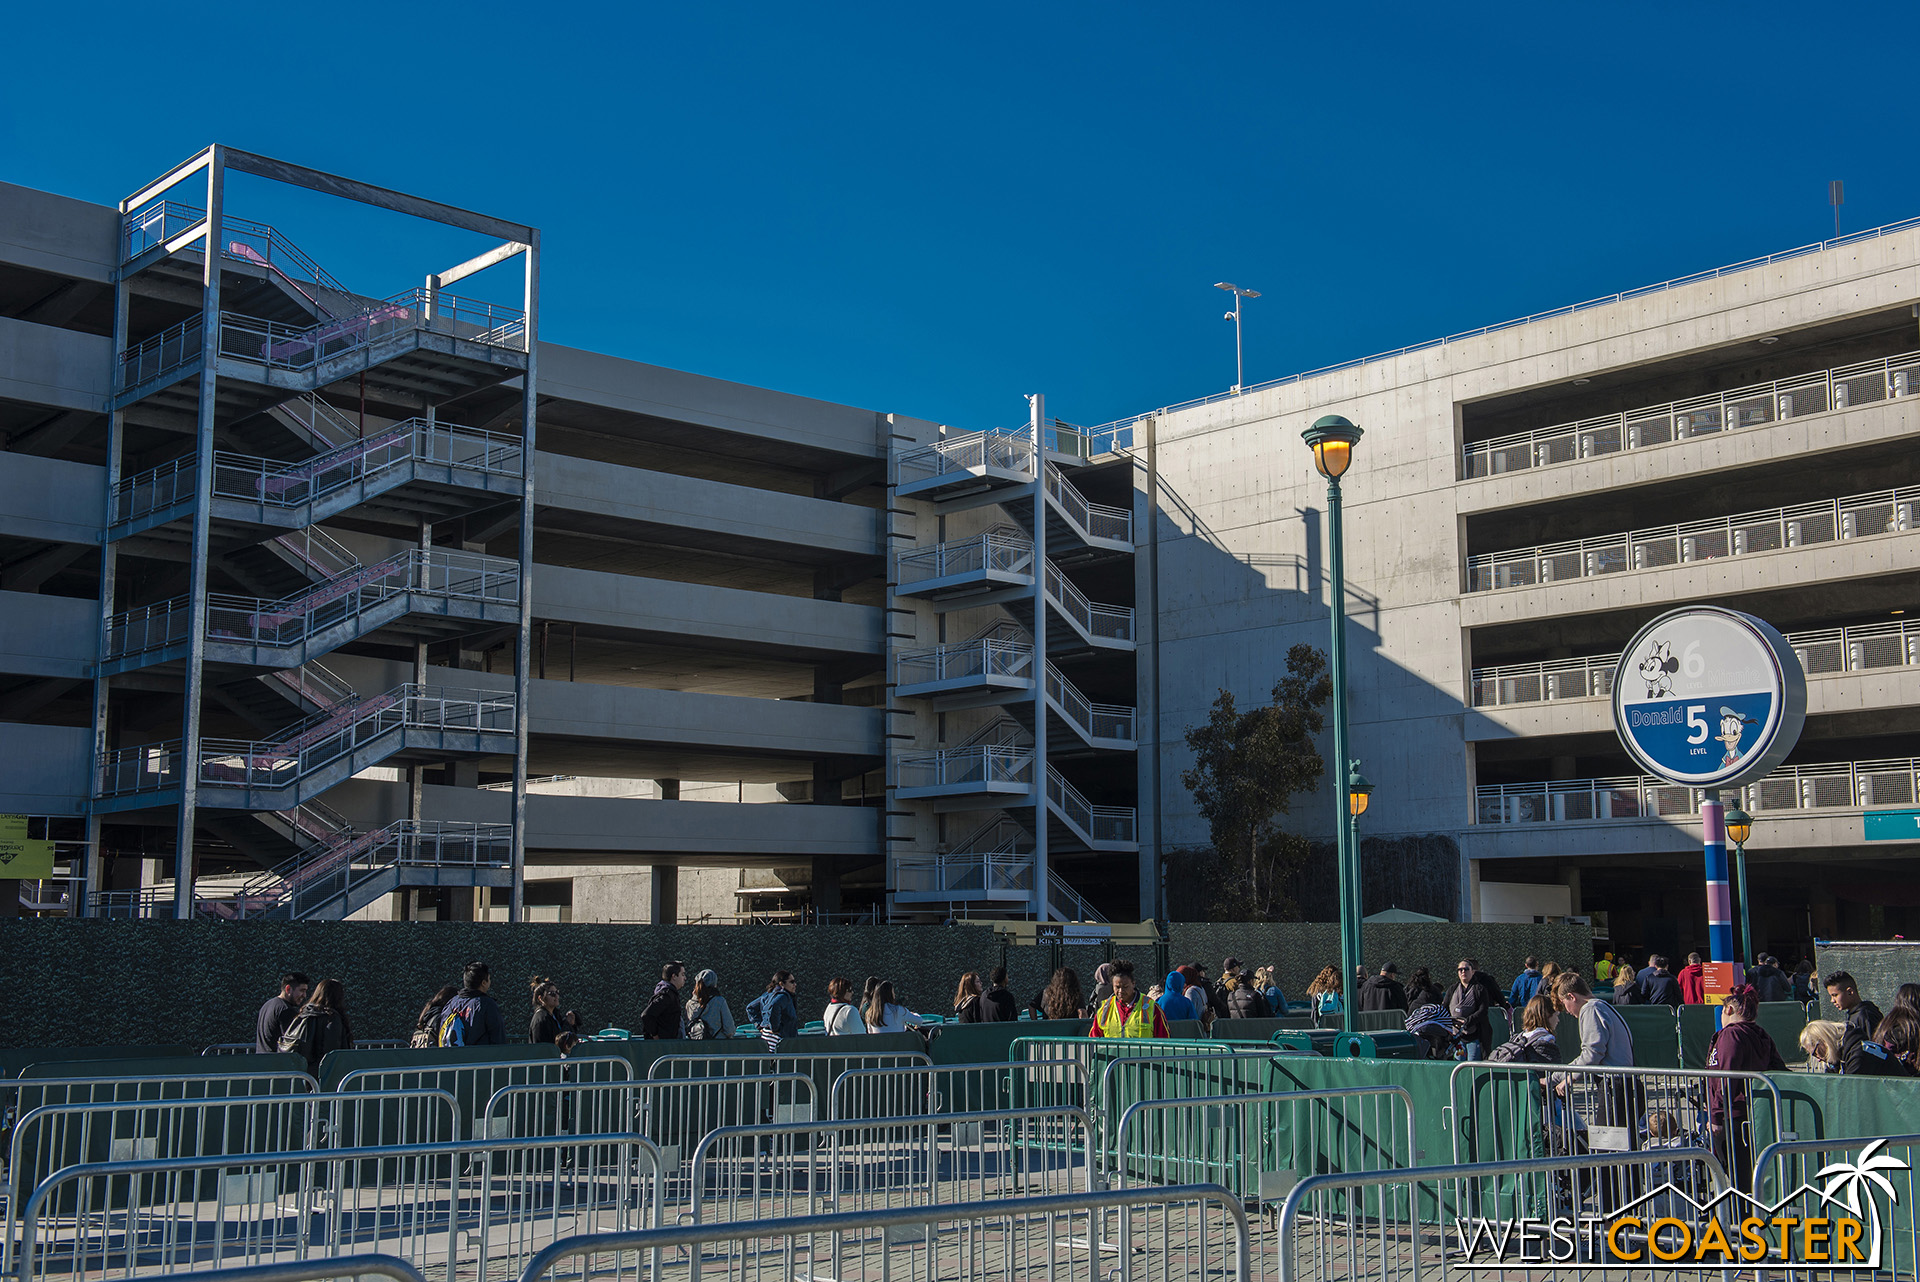  It’s starting to look more and more like a part of the complex.  They’ll need to paint those new stairs, though. 